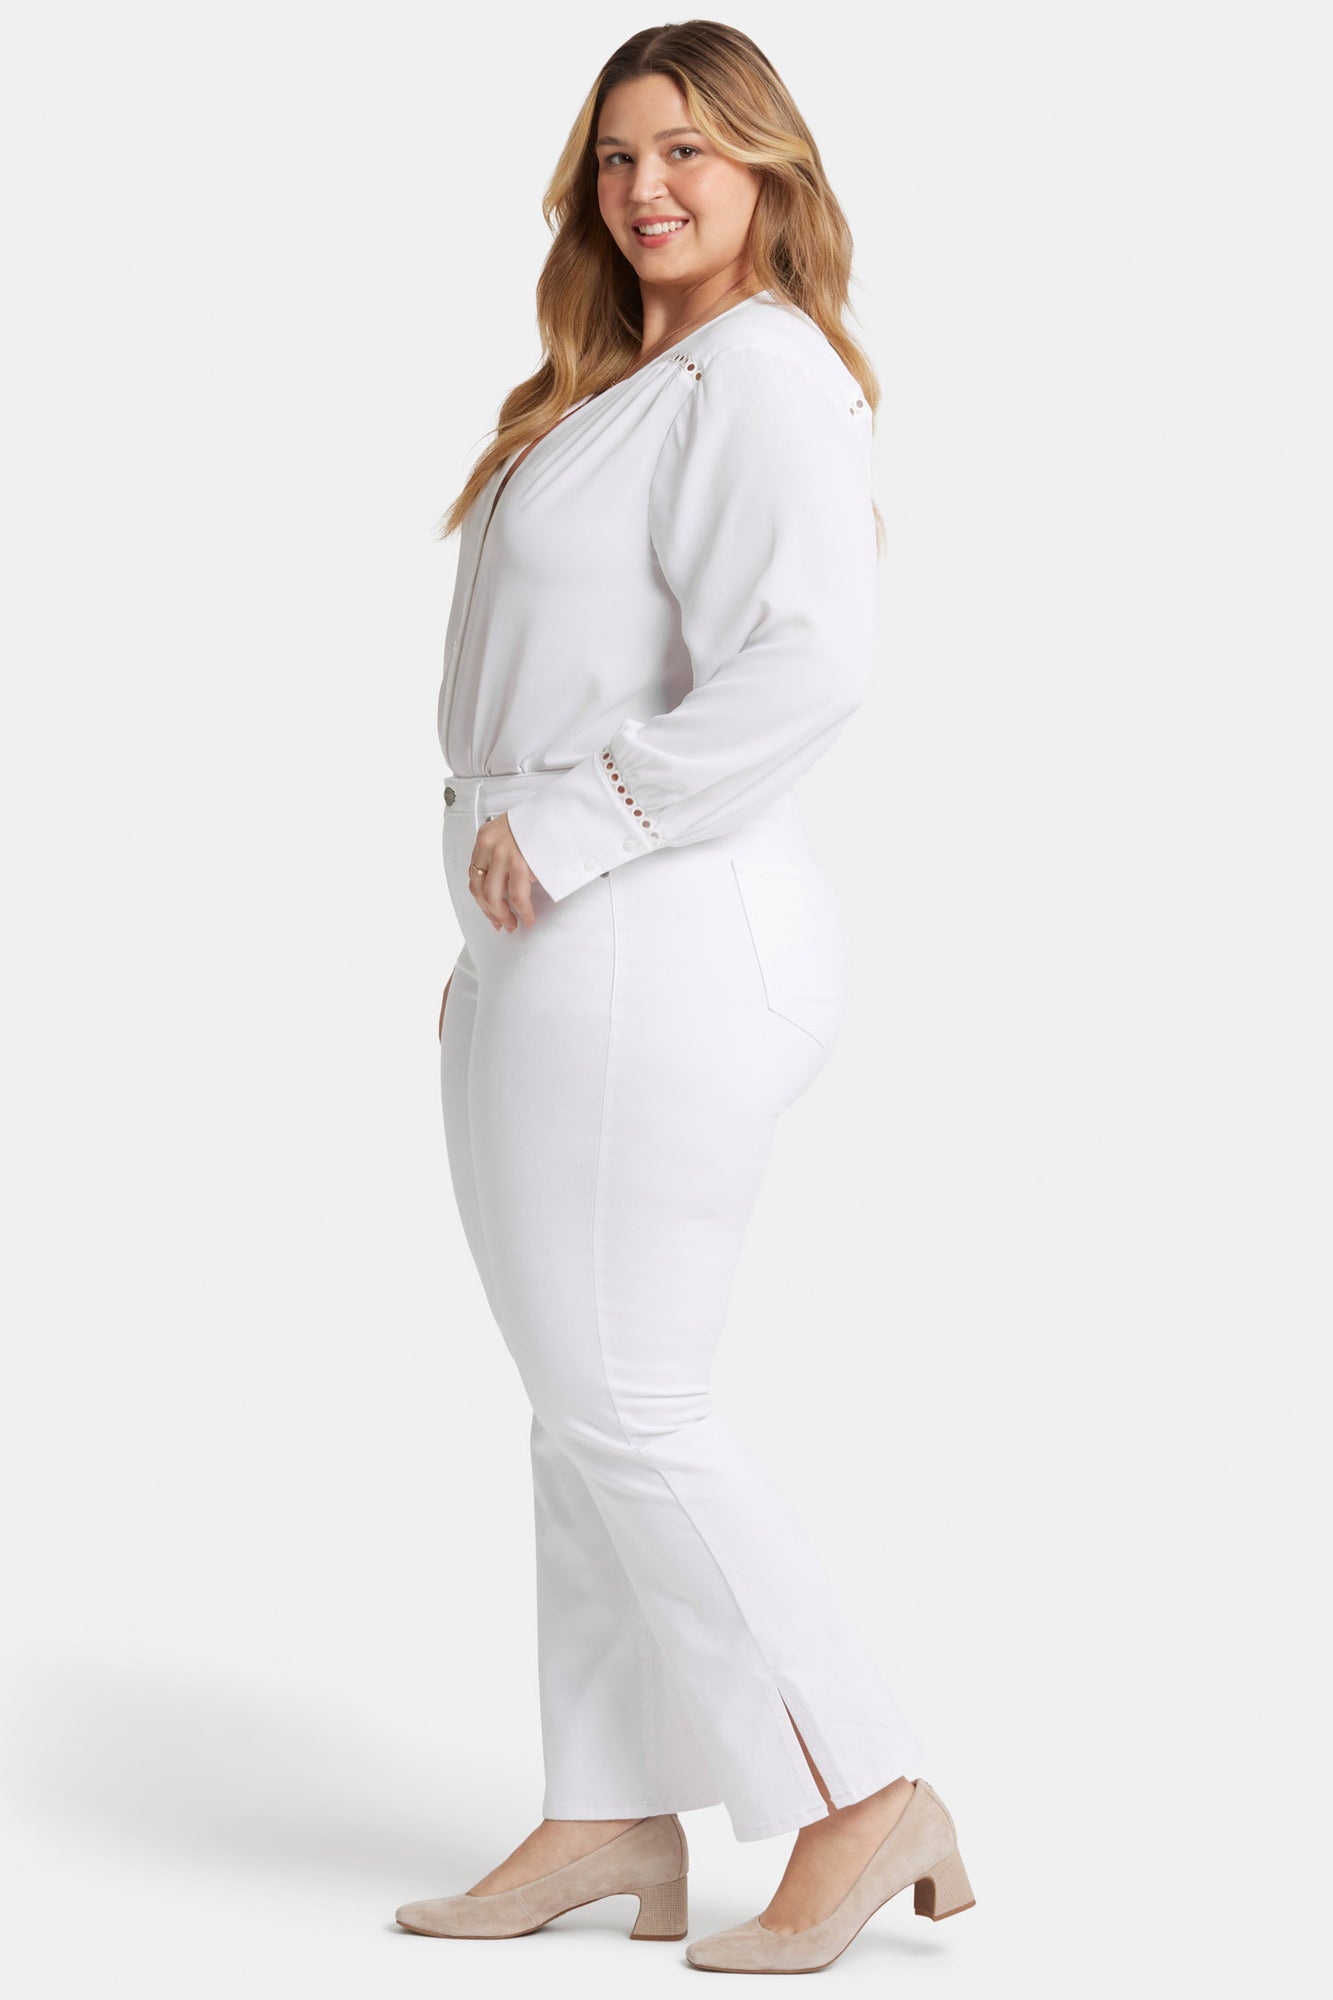 NYDJ Barbara Bootcut Jeans In Plus Size With Side Slits - Optic White